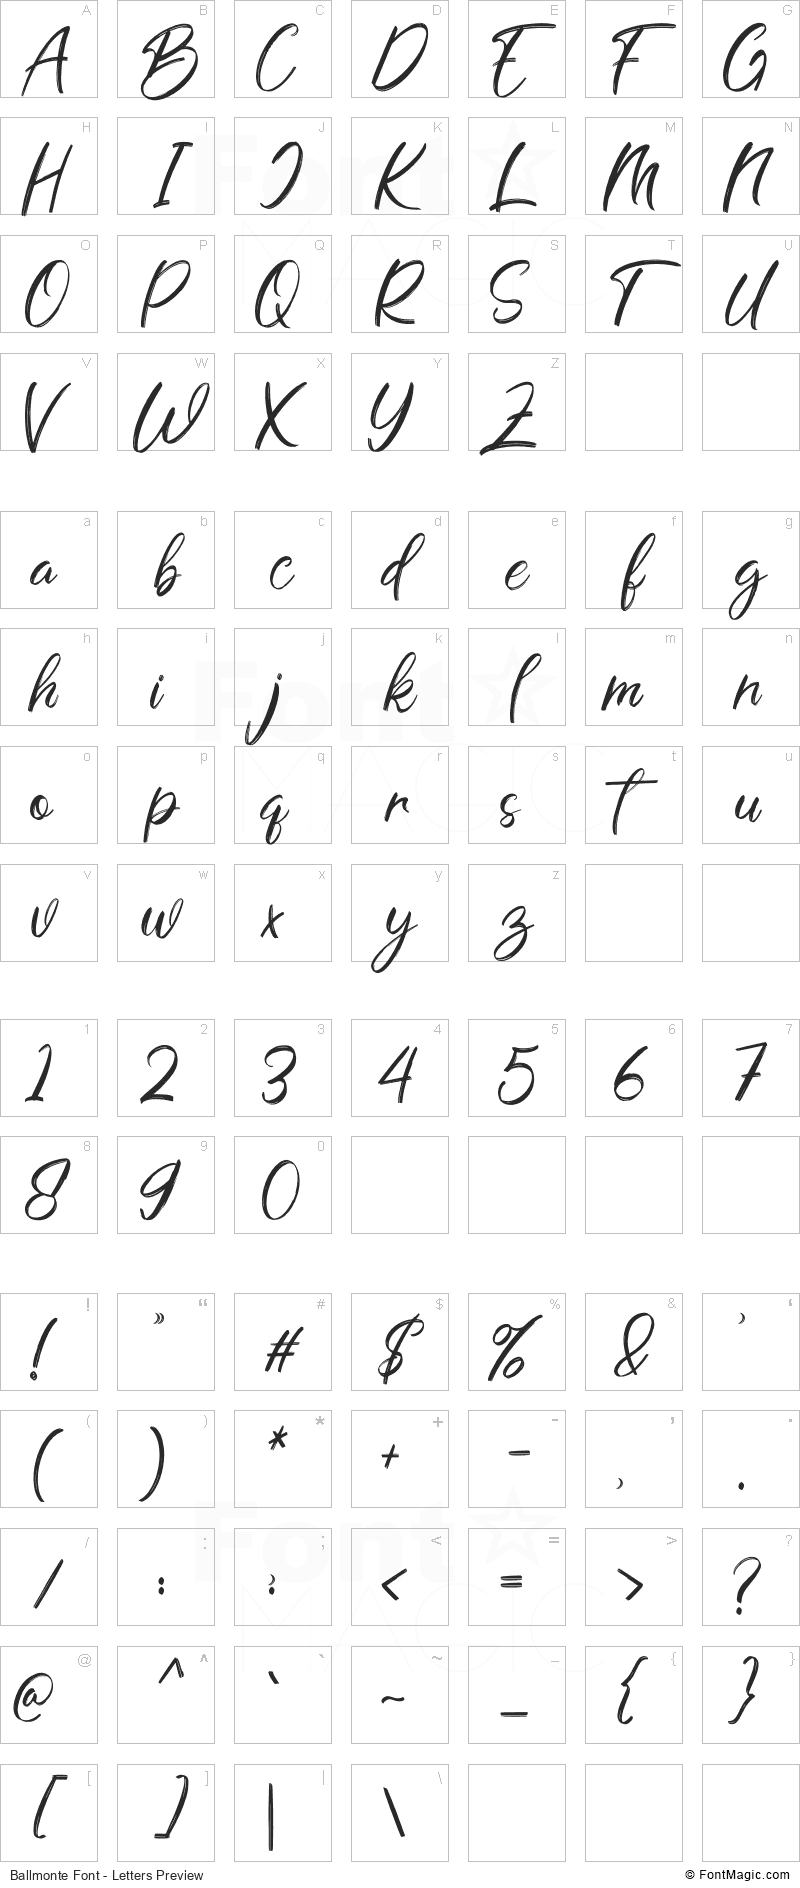 Ballmonte Font - All Latters Preview Chart